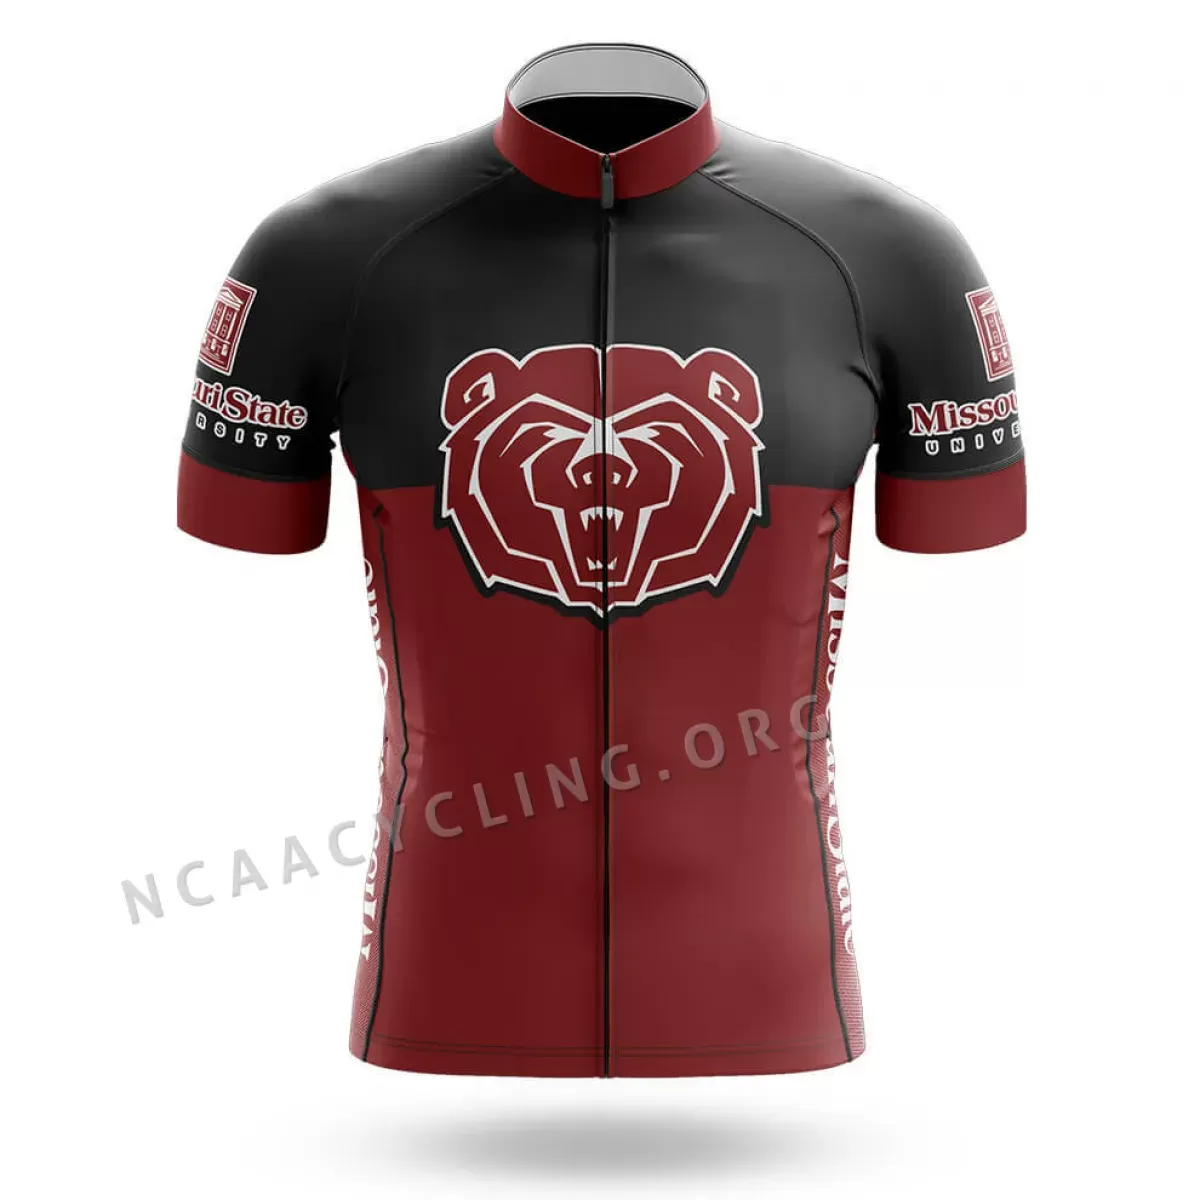 Where To Buy Missouri State University Cycling Jersey Ver.2